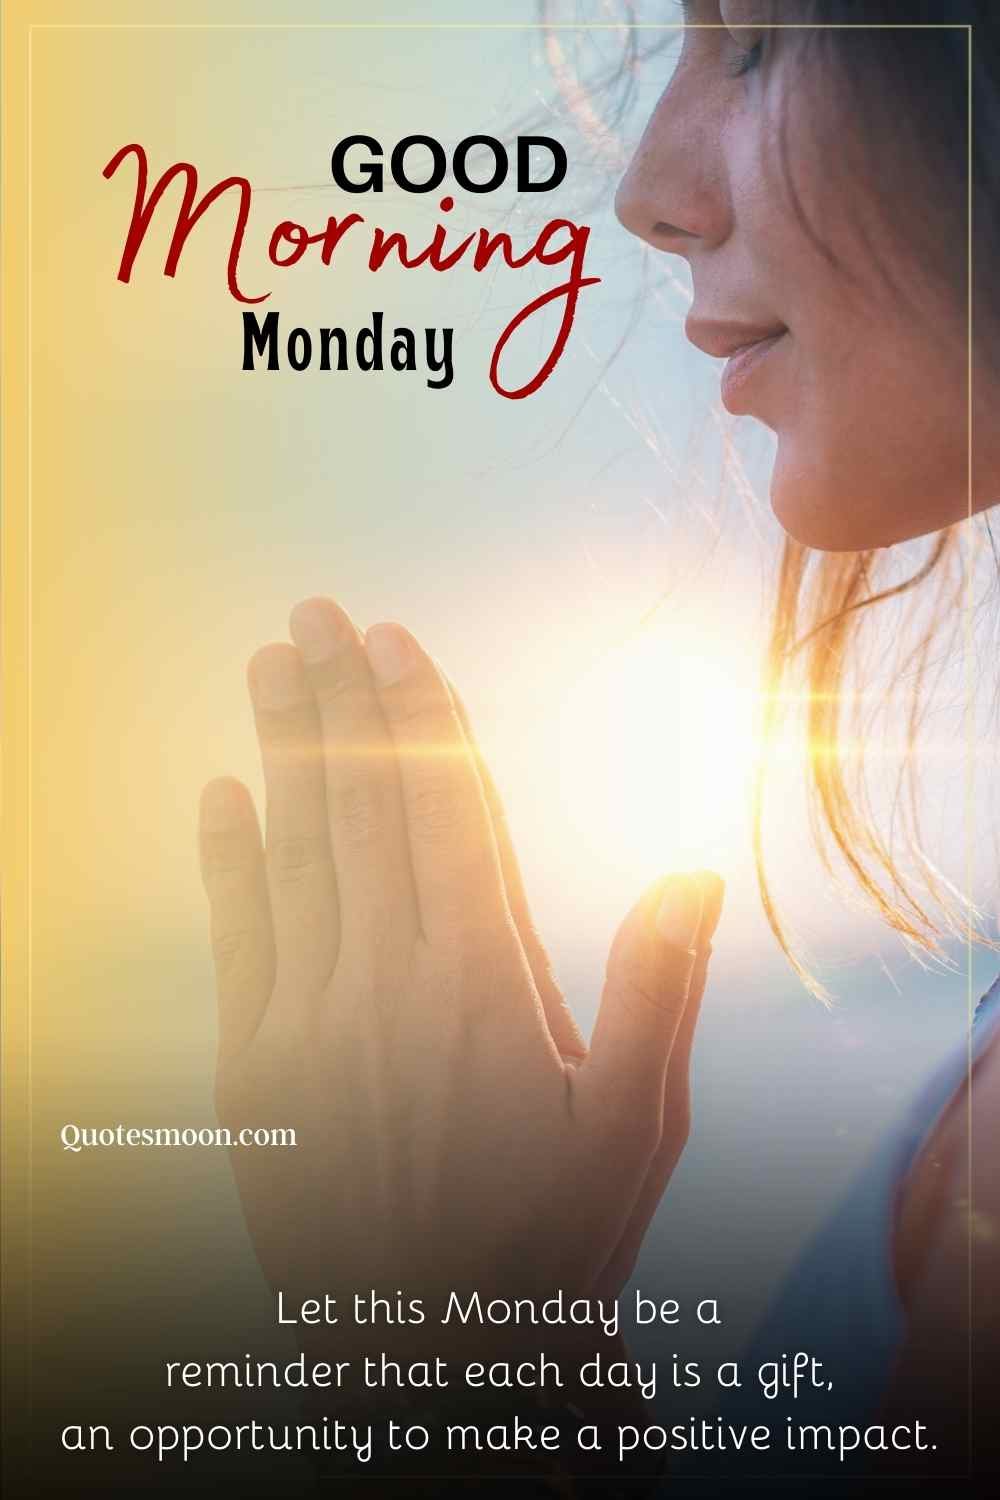 Monday Morning for a Thankful Heart blessings pic